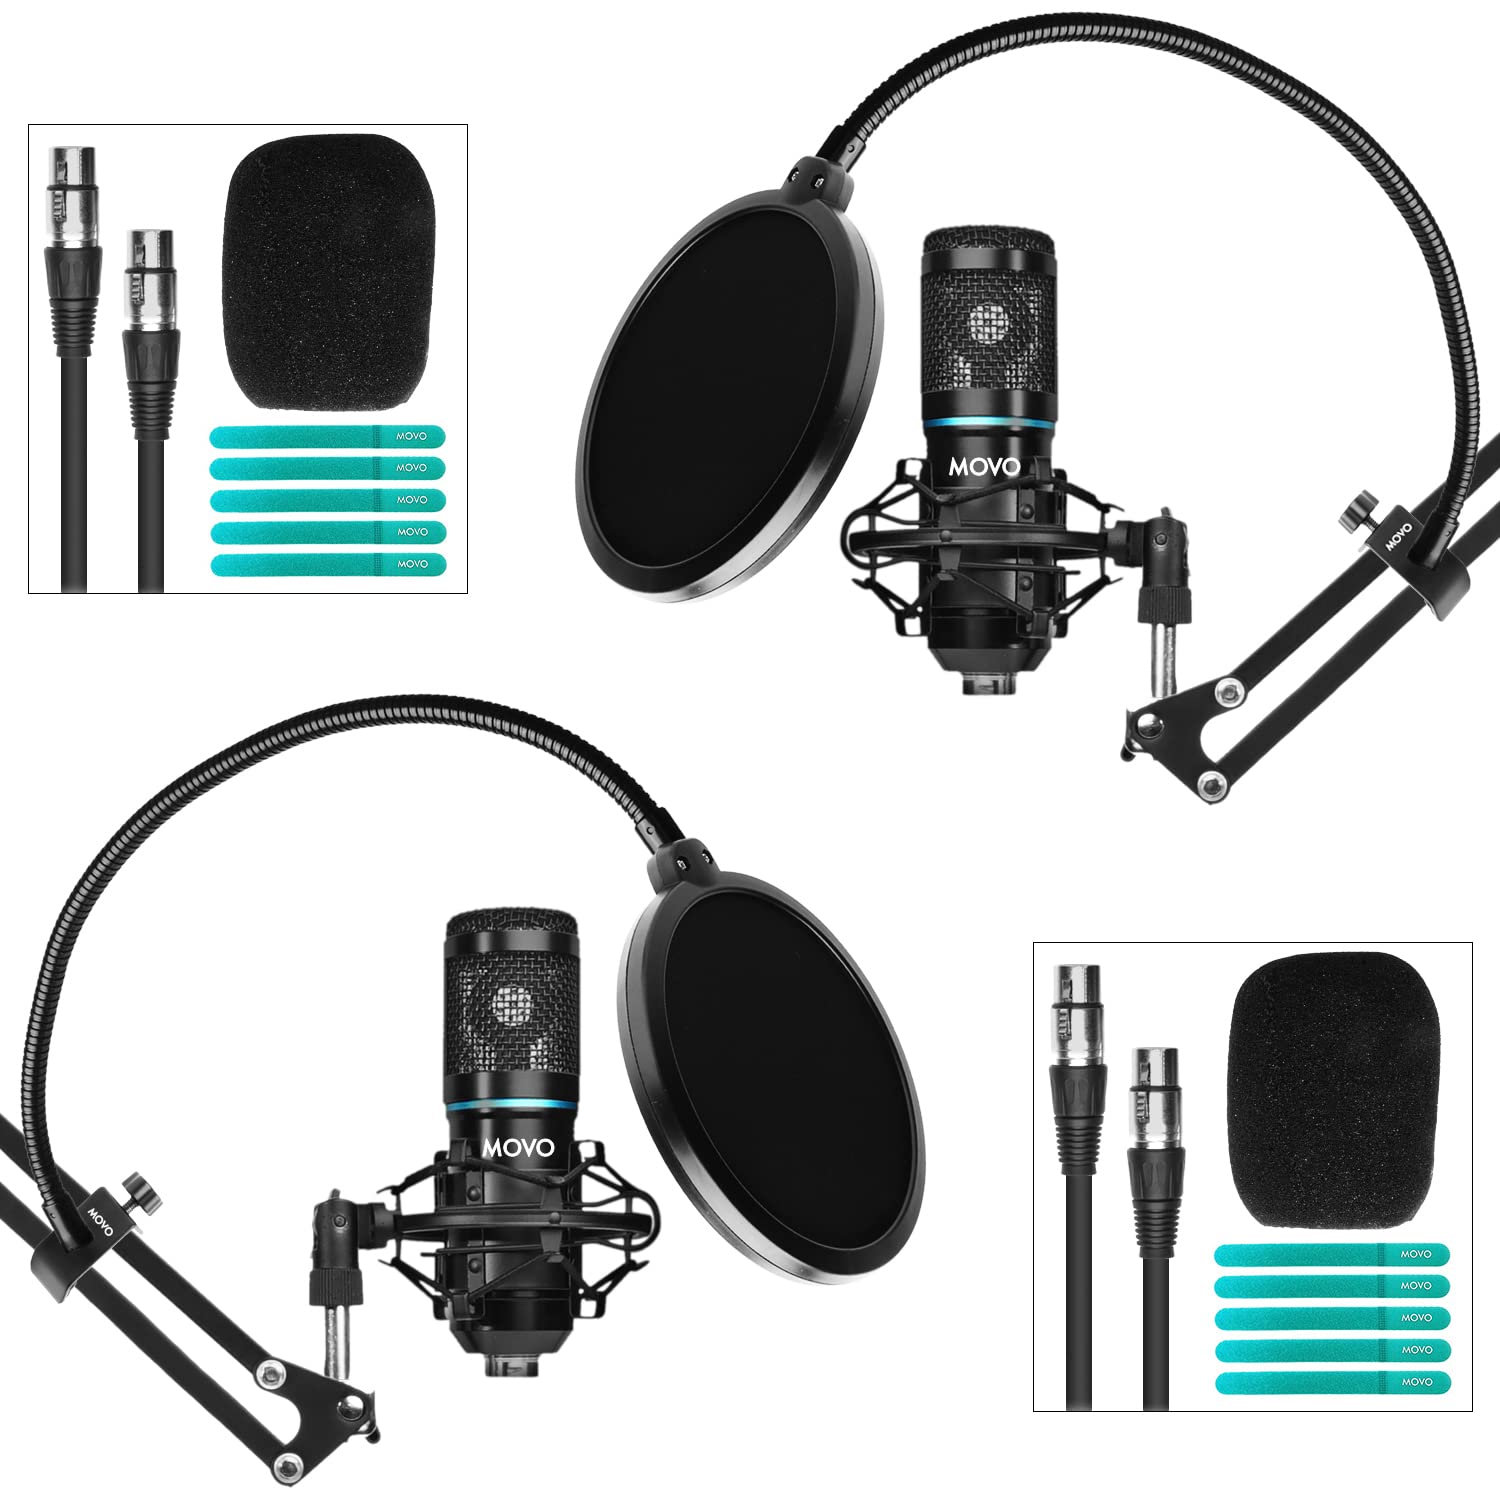 Movo PodPak2A 2-Pack Universal Cardioid Condenser Microphone Kit with Articulating Scissor Arm Mic Stand, Shock Mount, and Gooseneck Pop Filter - Podcast Equipment Set for YouTube, Podcast, Streaming  - Like New